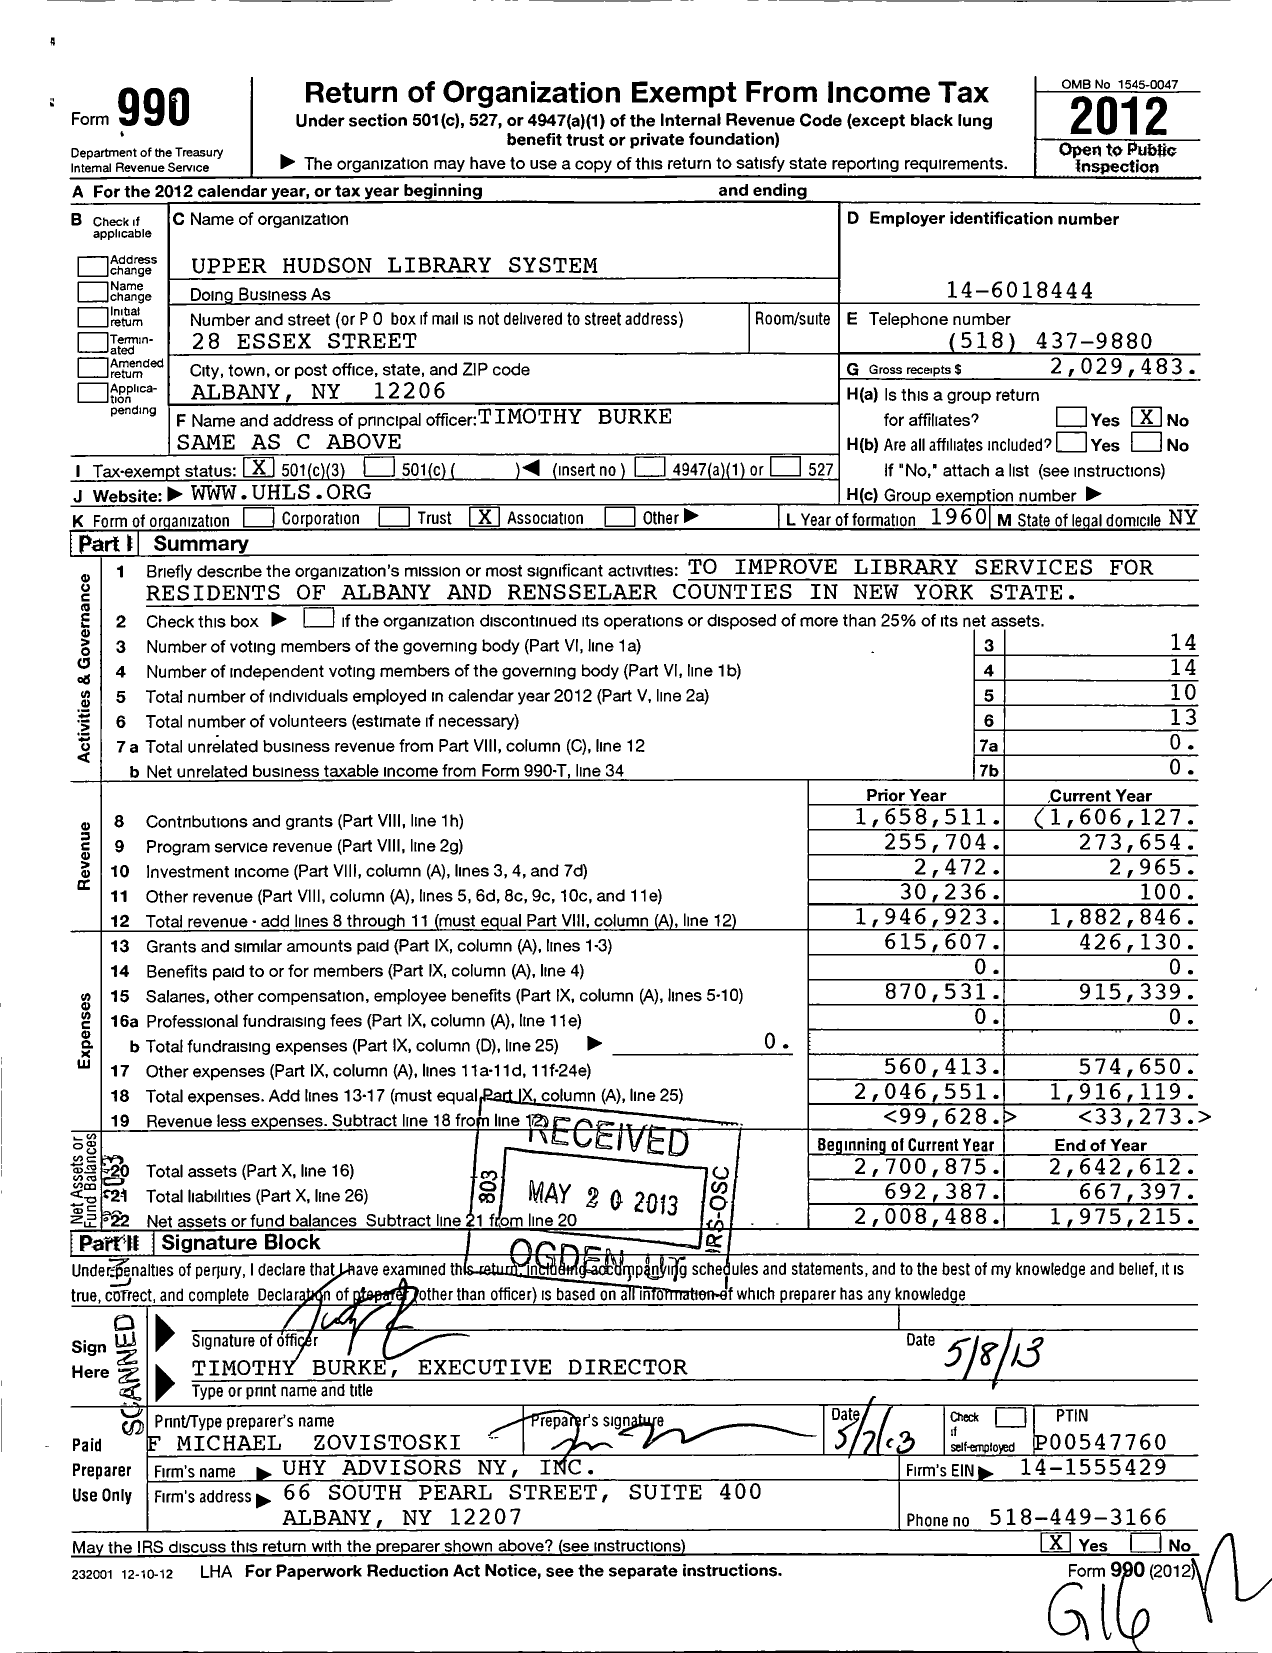 Image of first page of 2012 Form 990 for Upper Hudson Library System